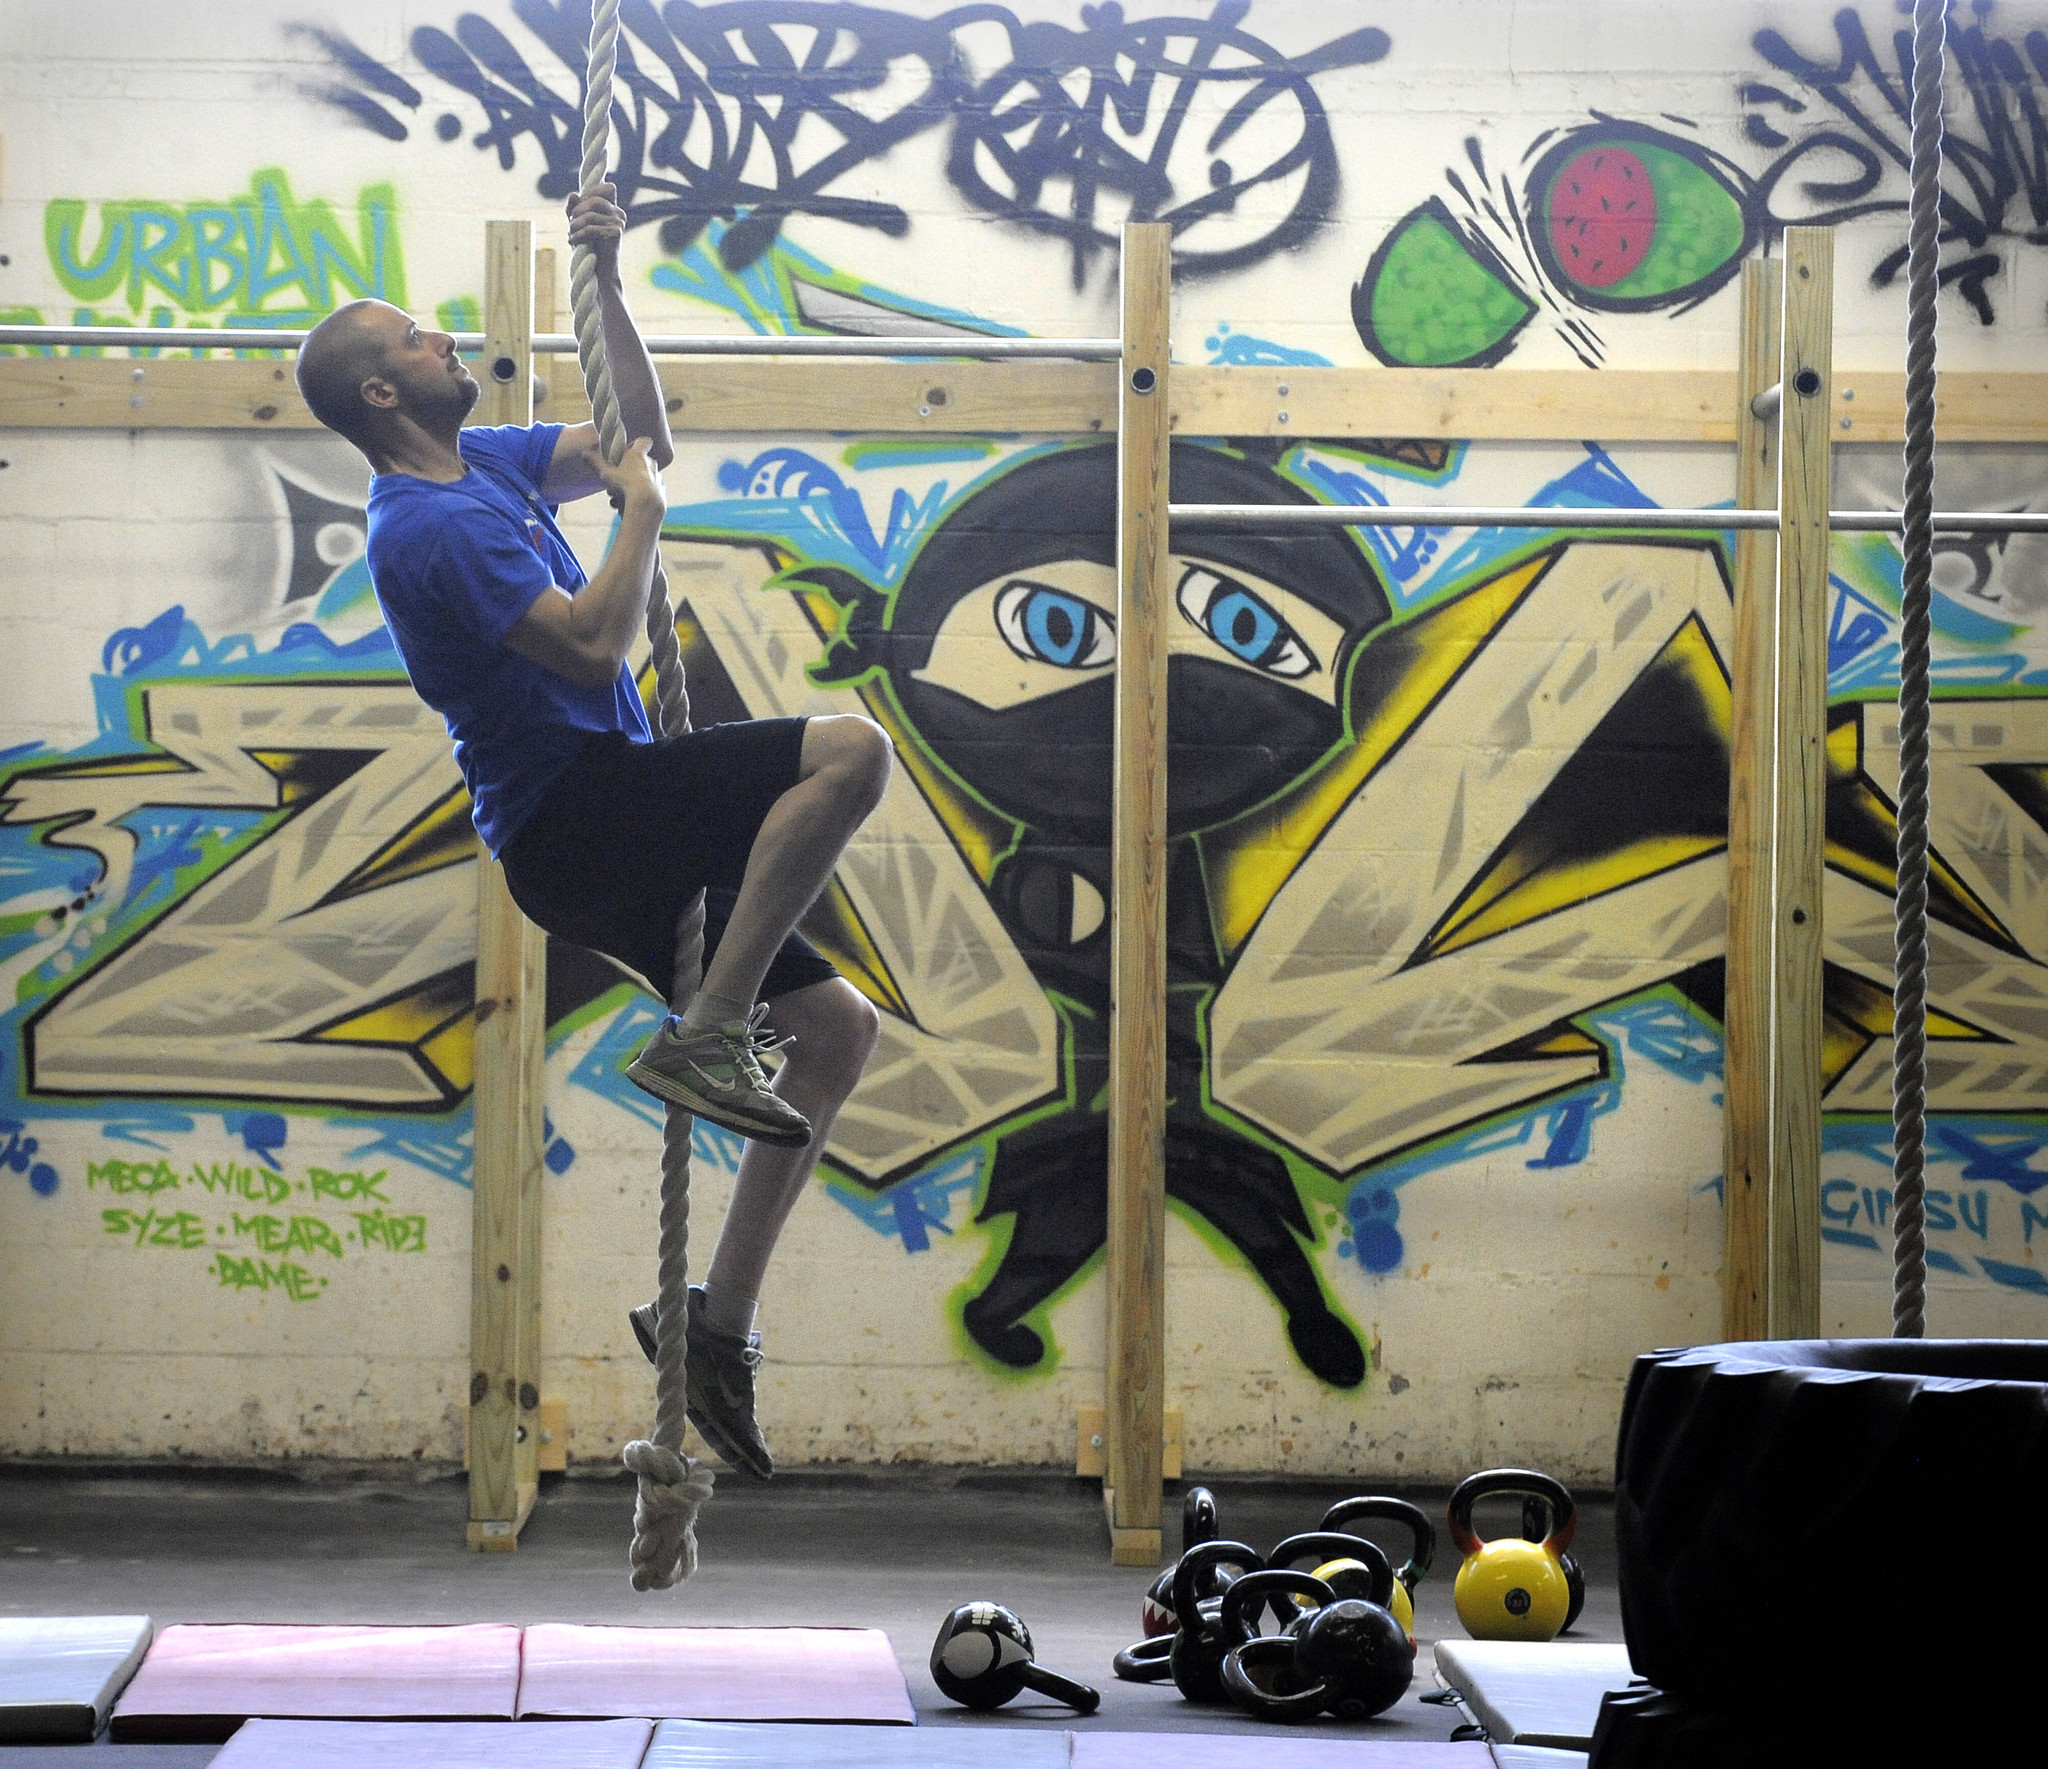 New Parkour gym hopes to lure customers seeking fresh way ...